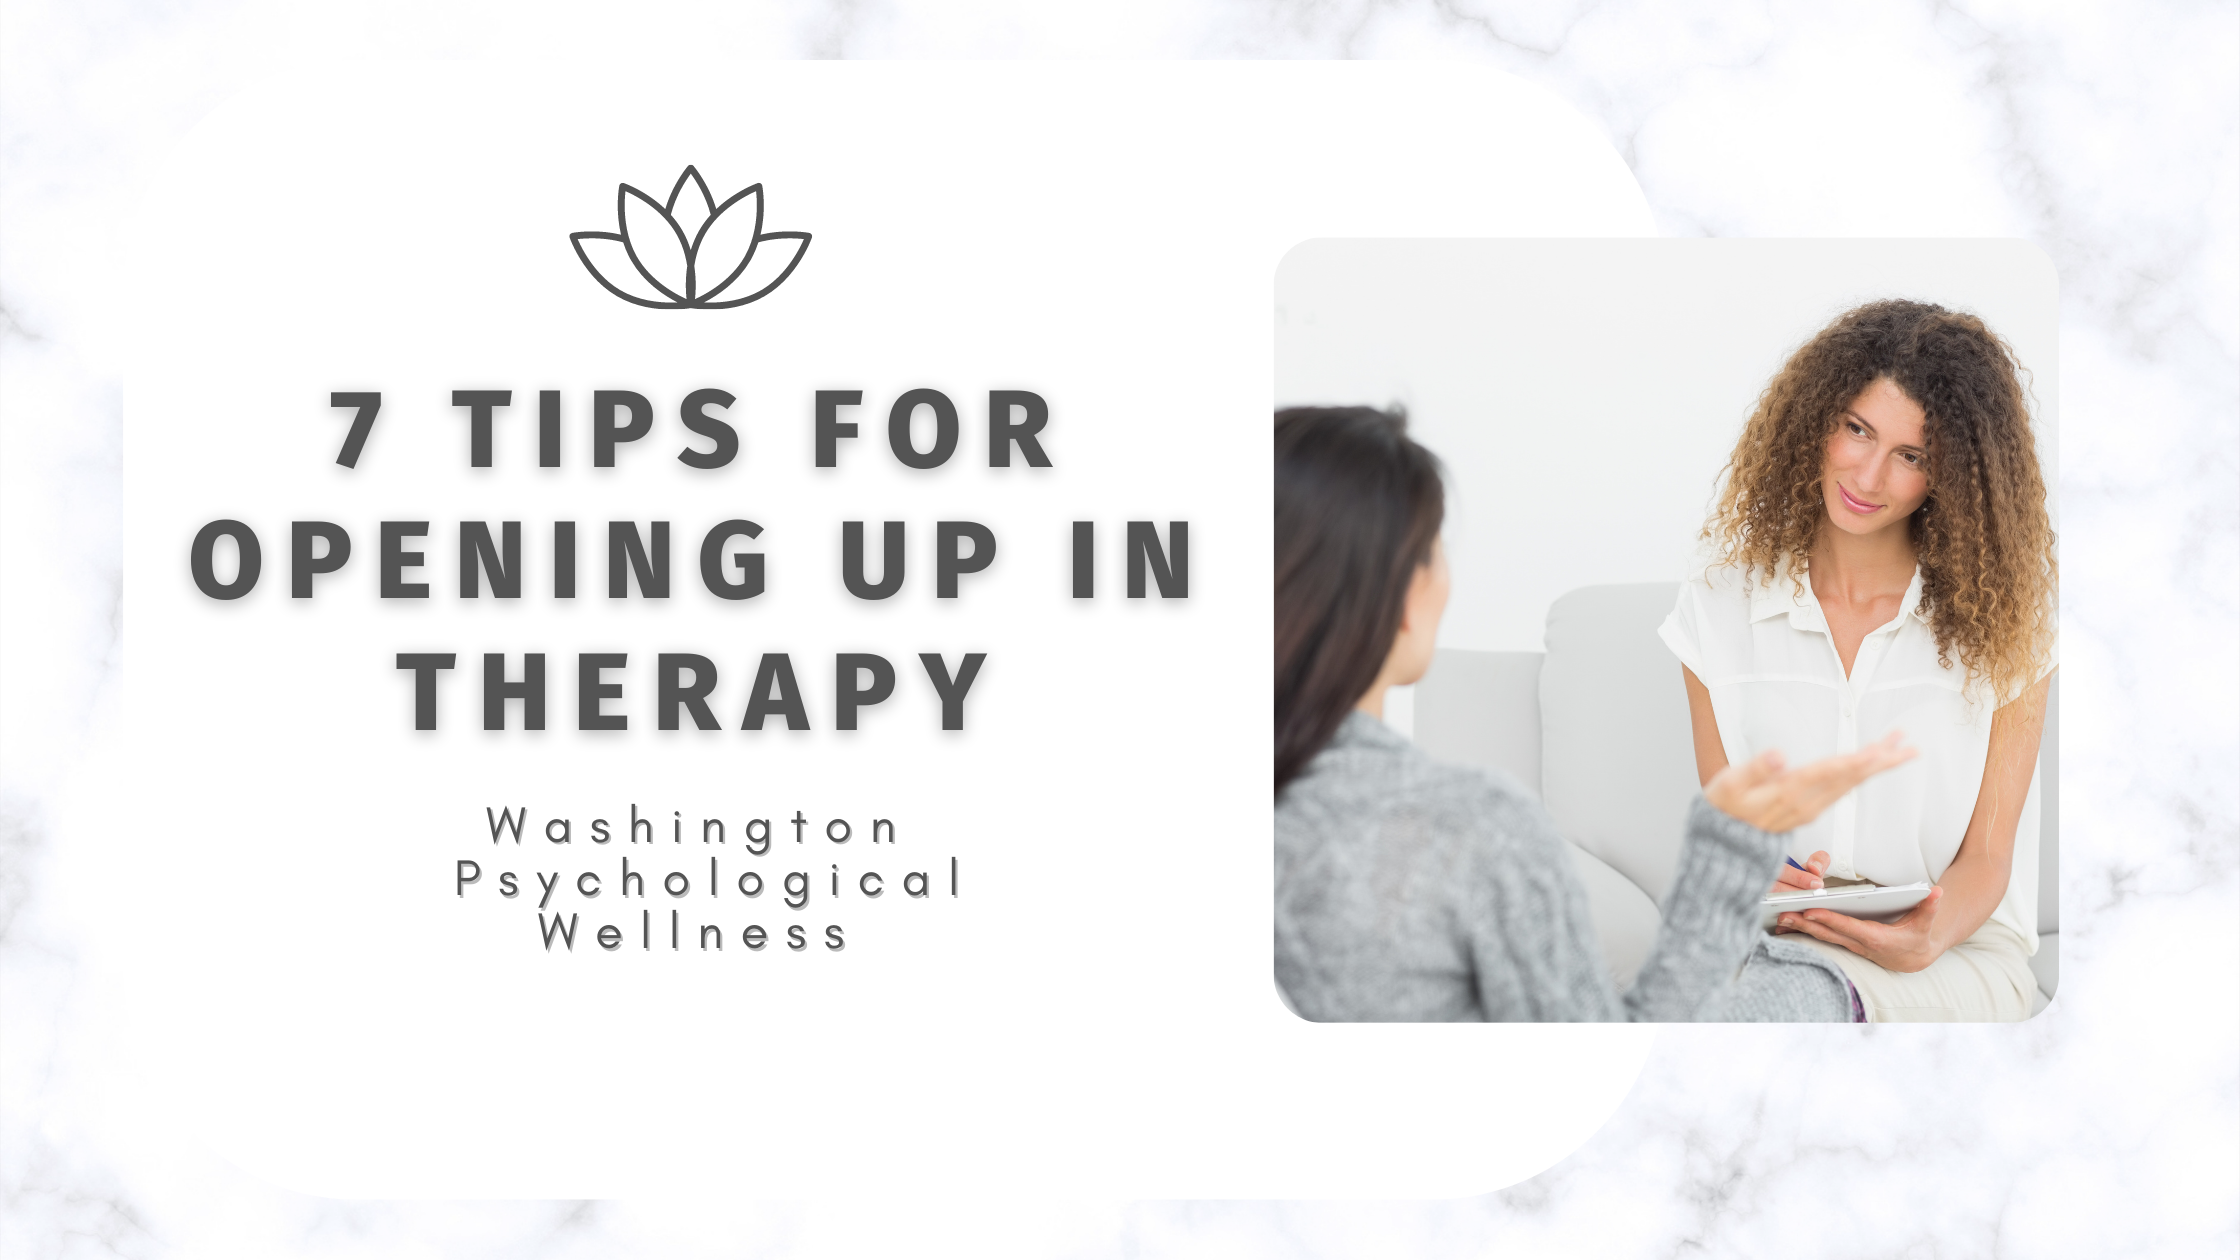 7 Tips for Opening Up in Therapy